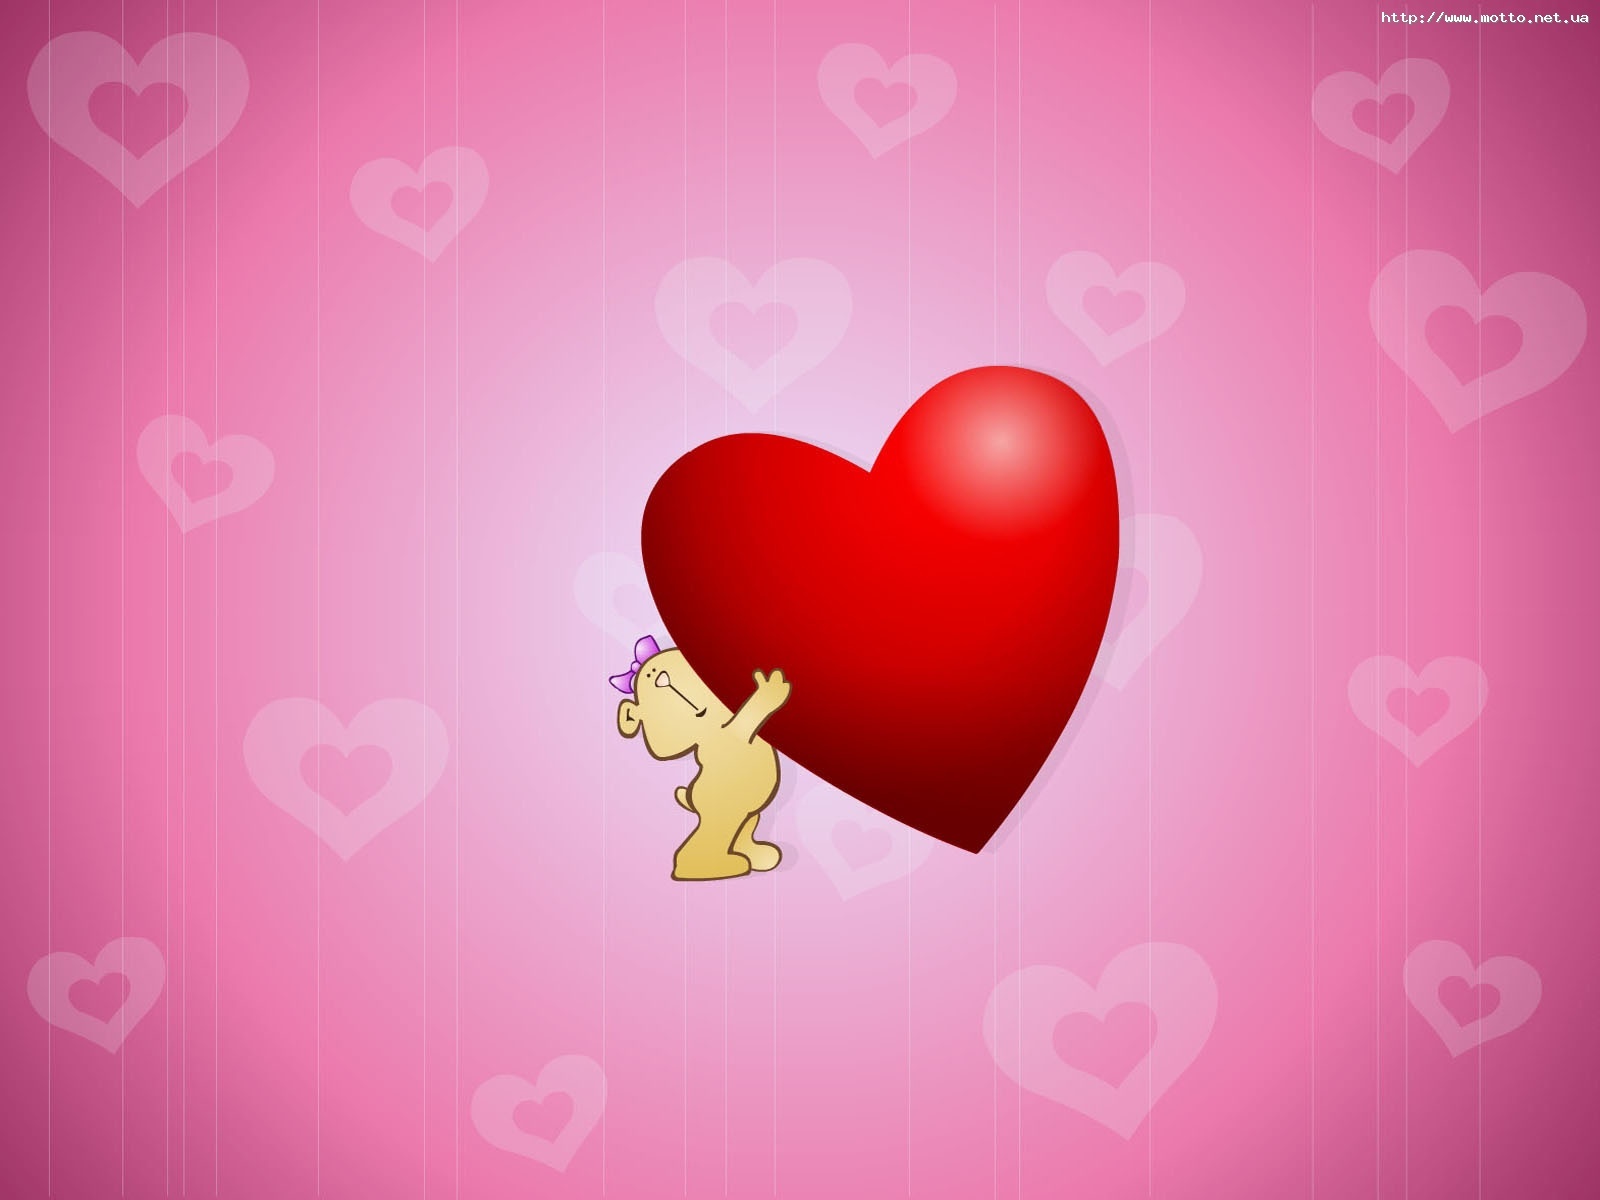 PC Wallpapers love, holidays, hearts, valentine's day, pictures, red